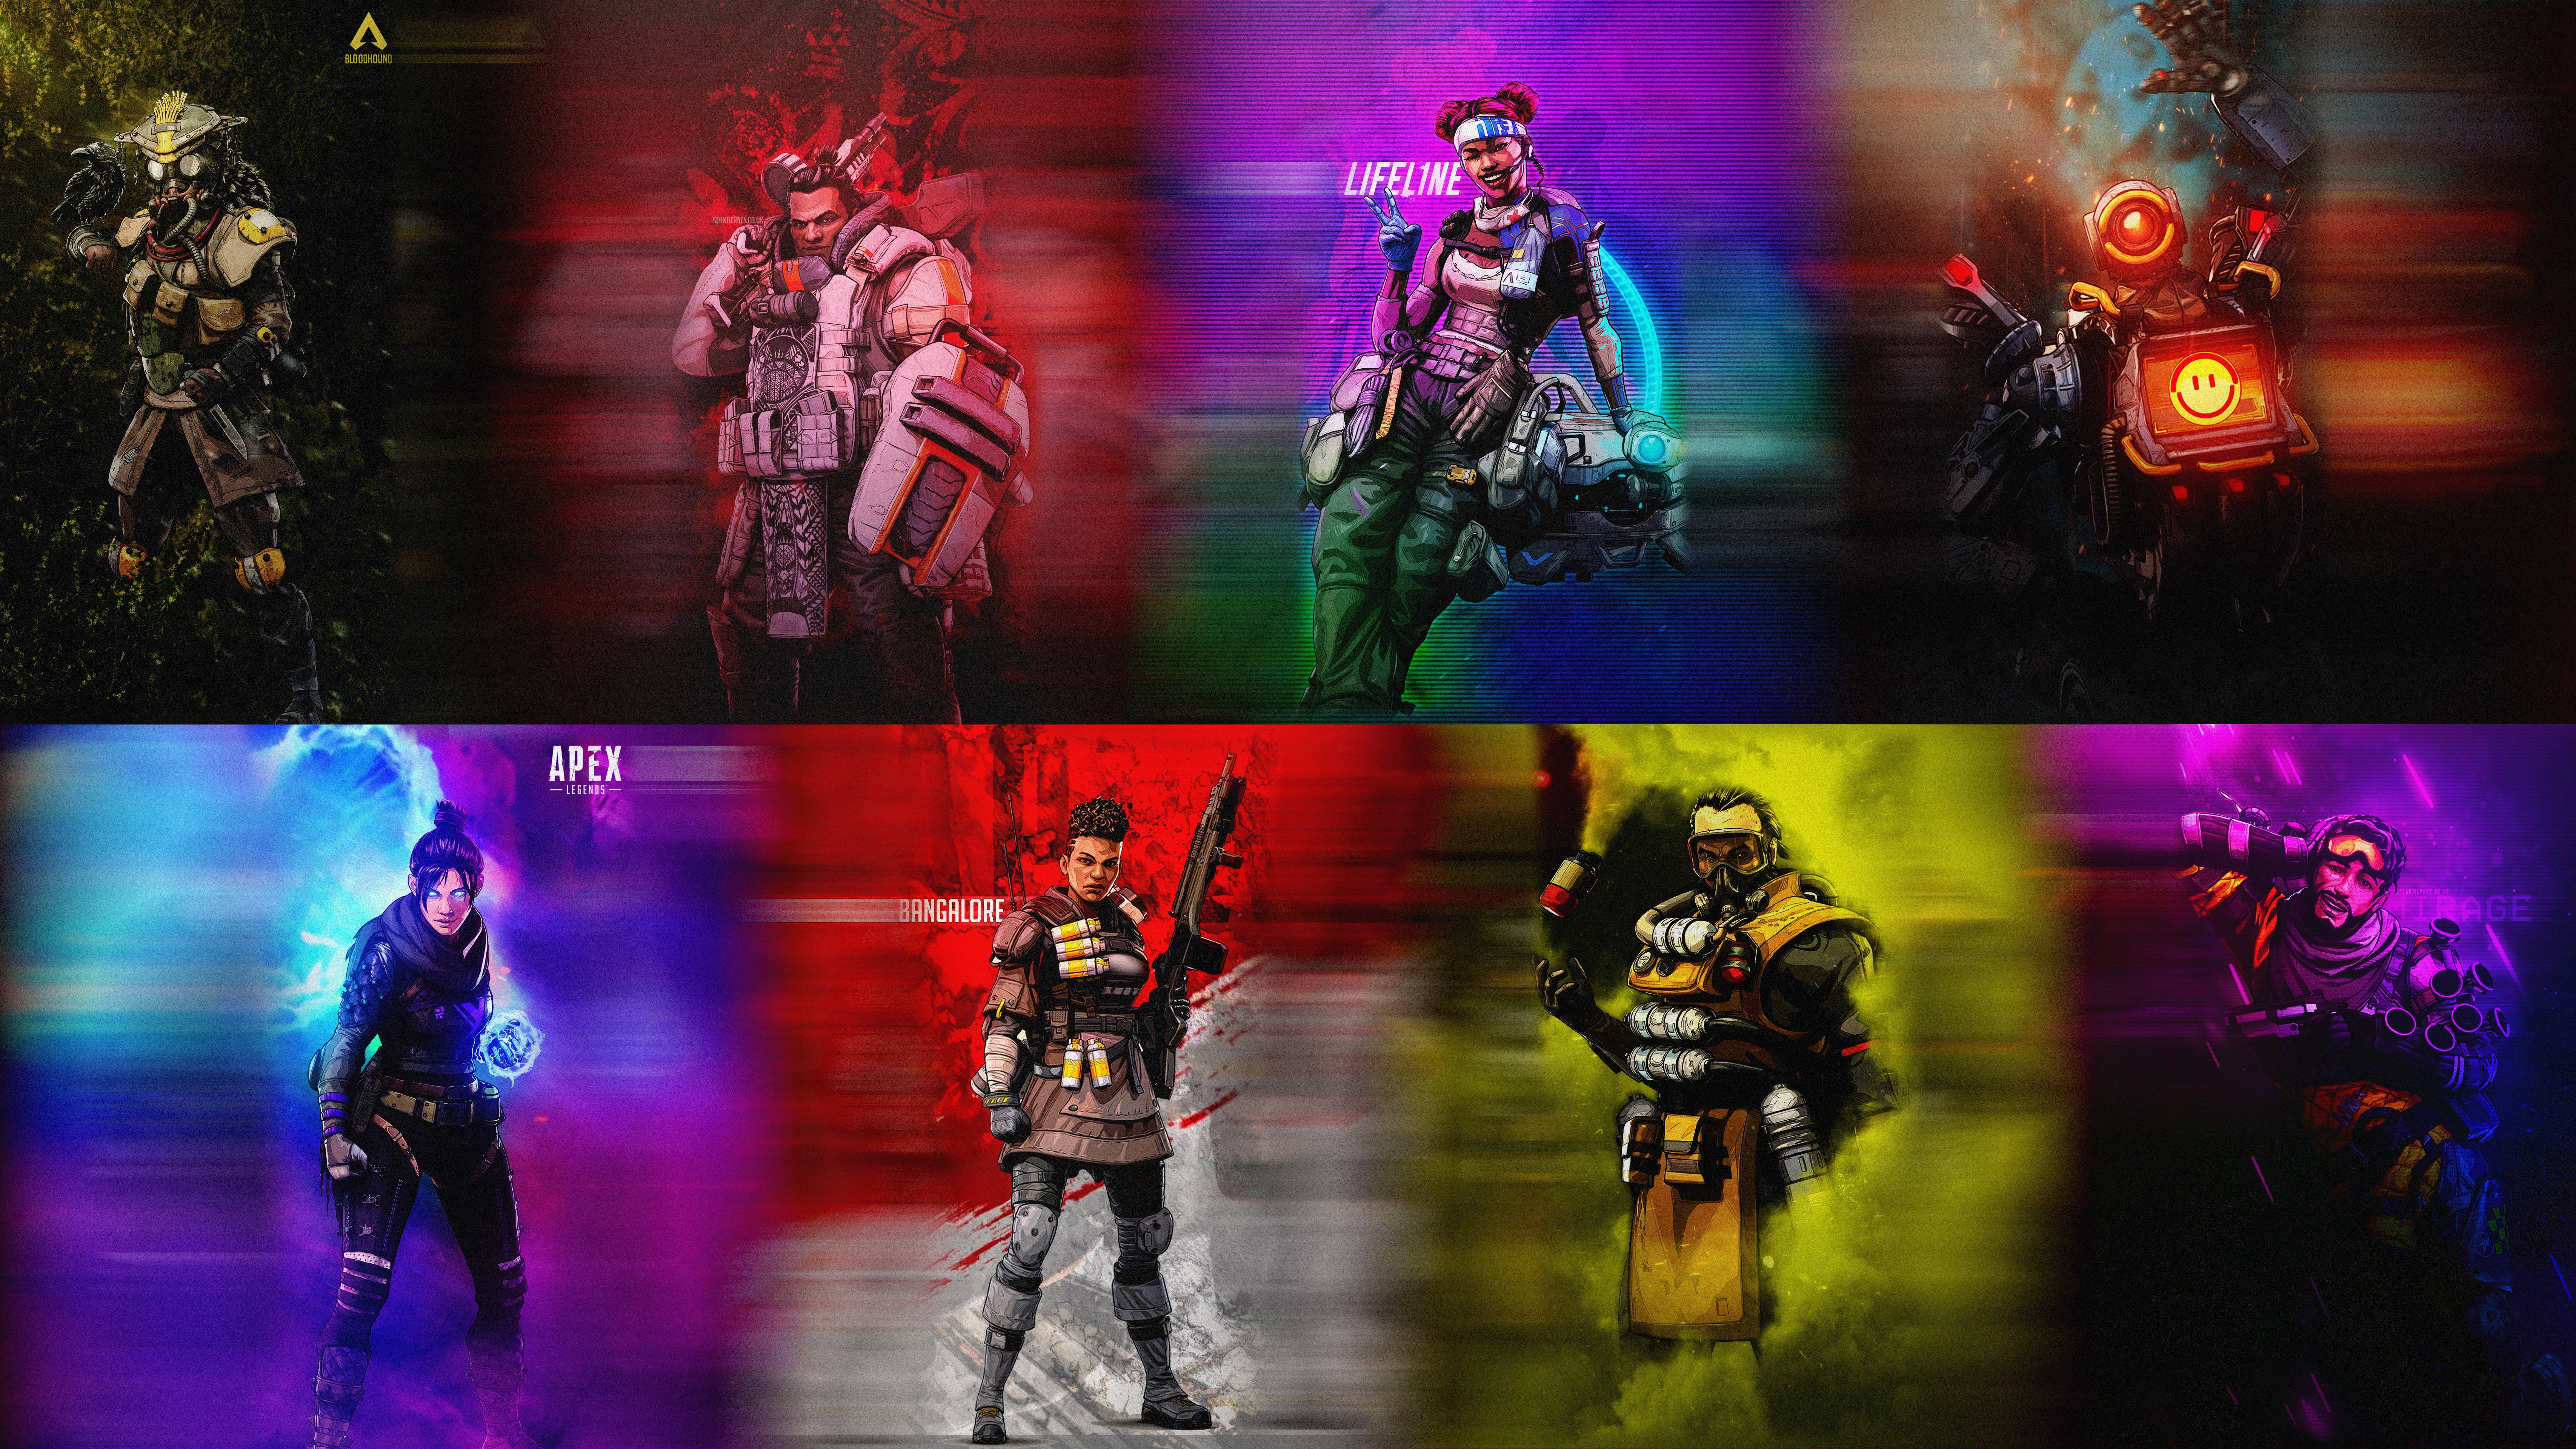 General 6827x3840 Apex Legends video game art collage PC gaming video game characters Bloodhound (Apex Legends) Gibraltar (Apex Legends) Lifeline (Apex Legends) Pathfinder (Apex Legends) Wraith (Apex Legends) Bangalore (Apex Legends) Caustic (Apex Legends) Mirage (Apex Legends)